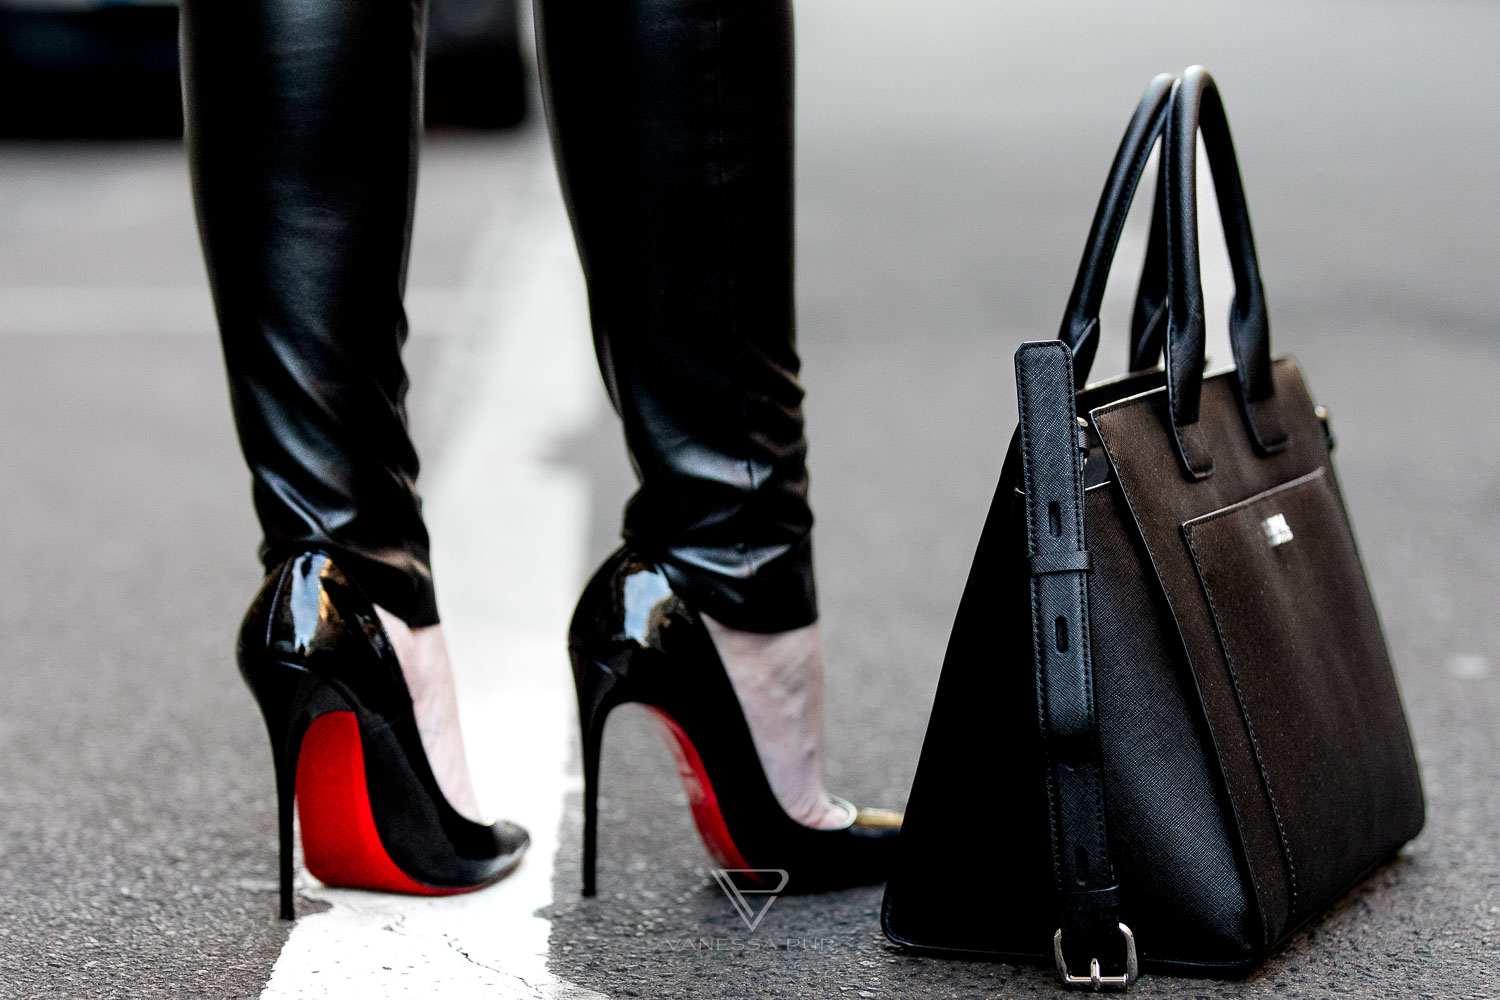 Buying Louboutin high heels - what you should know beforehand - Designer Pumps Christian Louboutin - fashion blogger and luxury blog Vanessa Pur - VANESSA PUR - YouTube Channel - Patreon Girl - Instagram - Feminine elegant fashion looks always with high heels